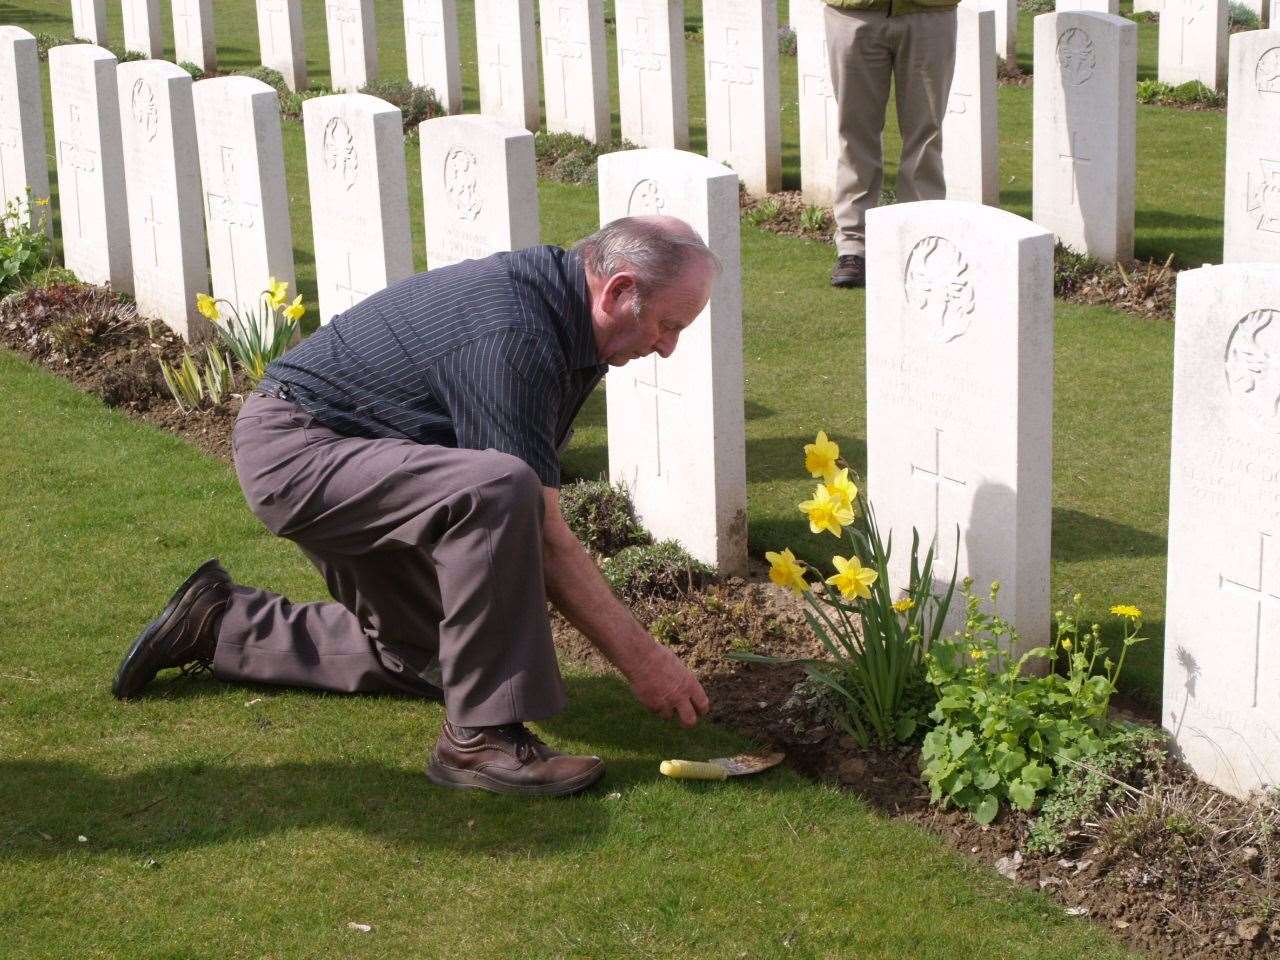 Alasdair Sutherland in 2010 on the trip organised by Clyne Heritage Society at the grave of his uncle at Dartmoor cemetery near Albert on the Somme.